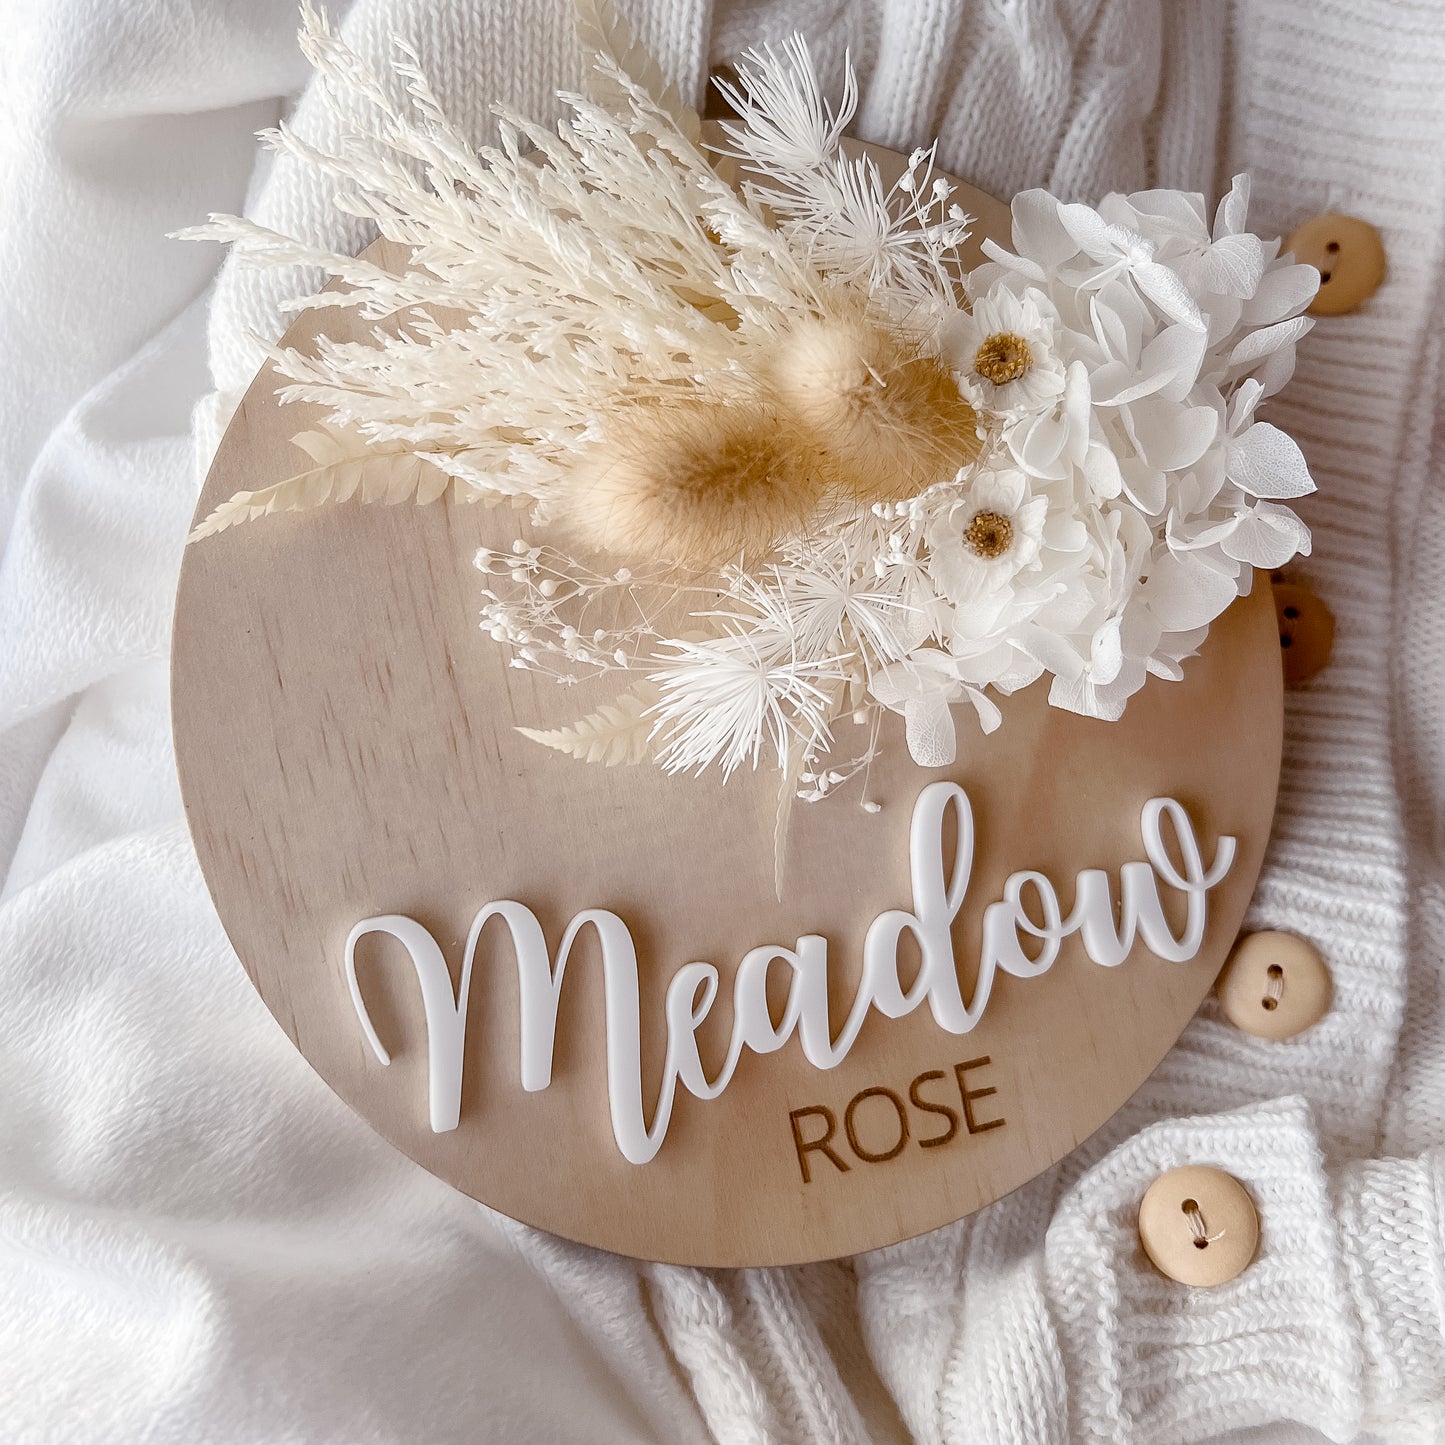 Wooden Name Plaque w/ dried flowers